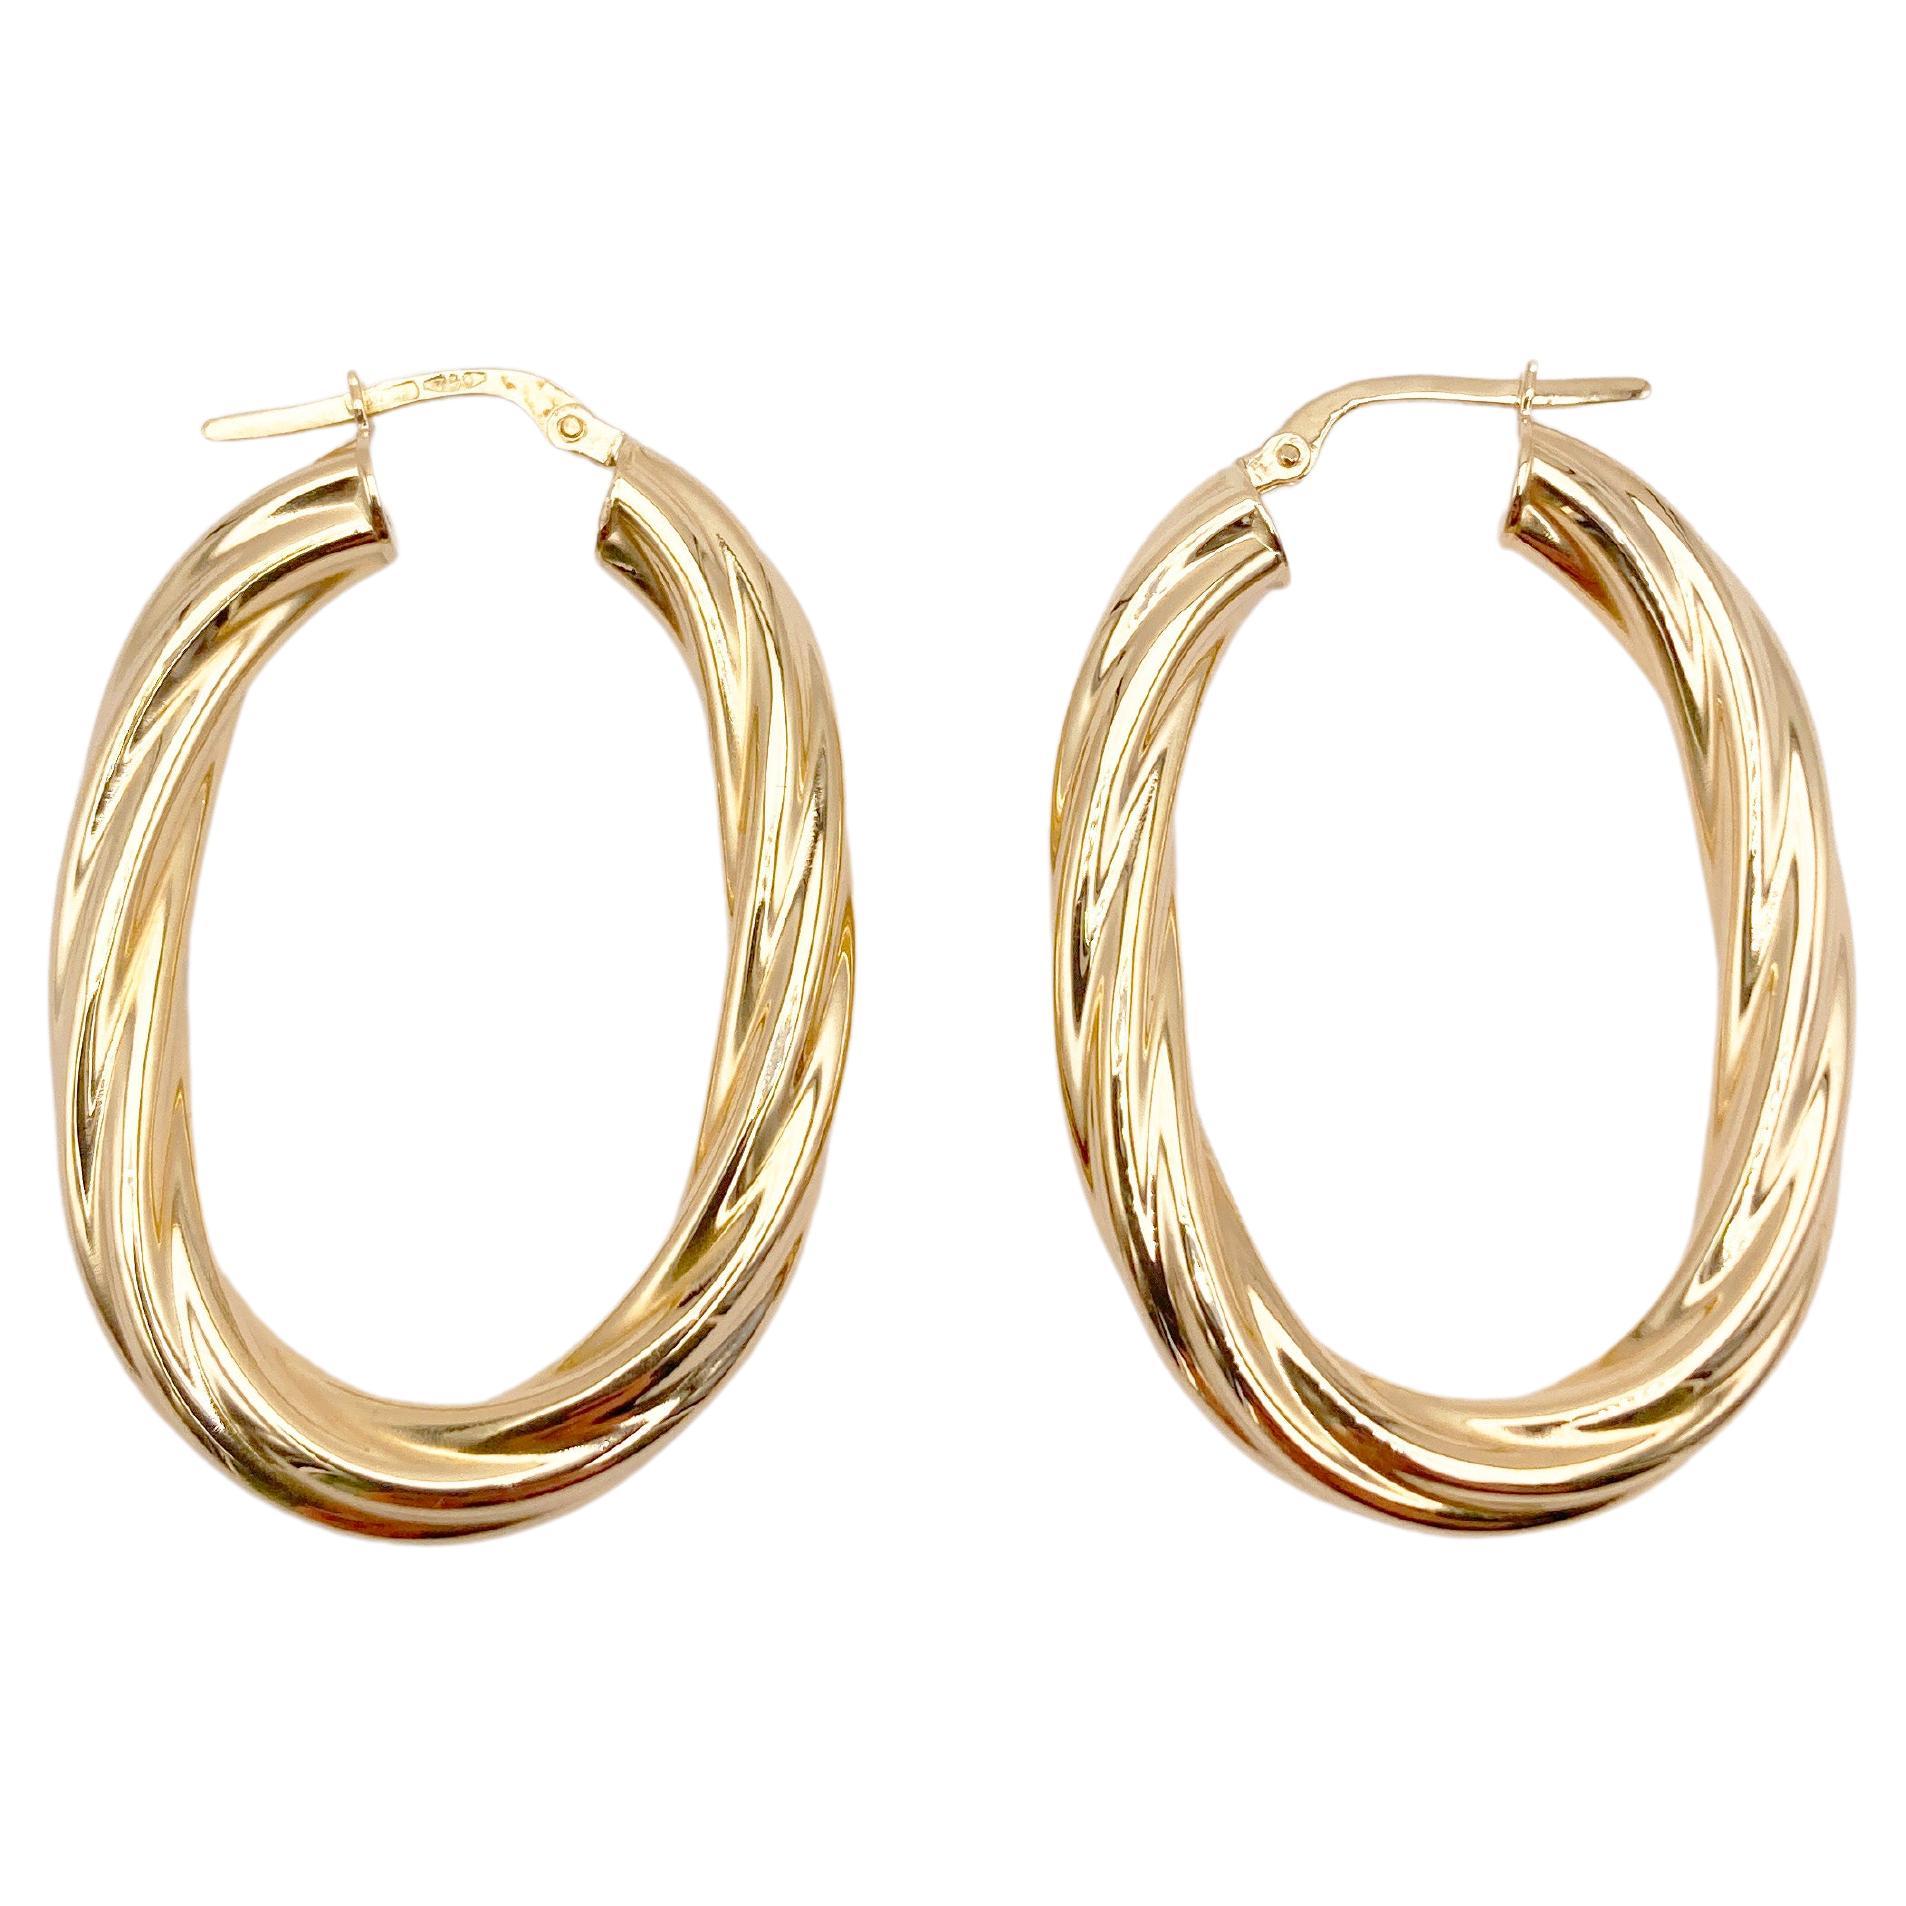 Revival 18K Yellow Gold Hoops Earrings circa 1980 For Sale